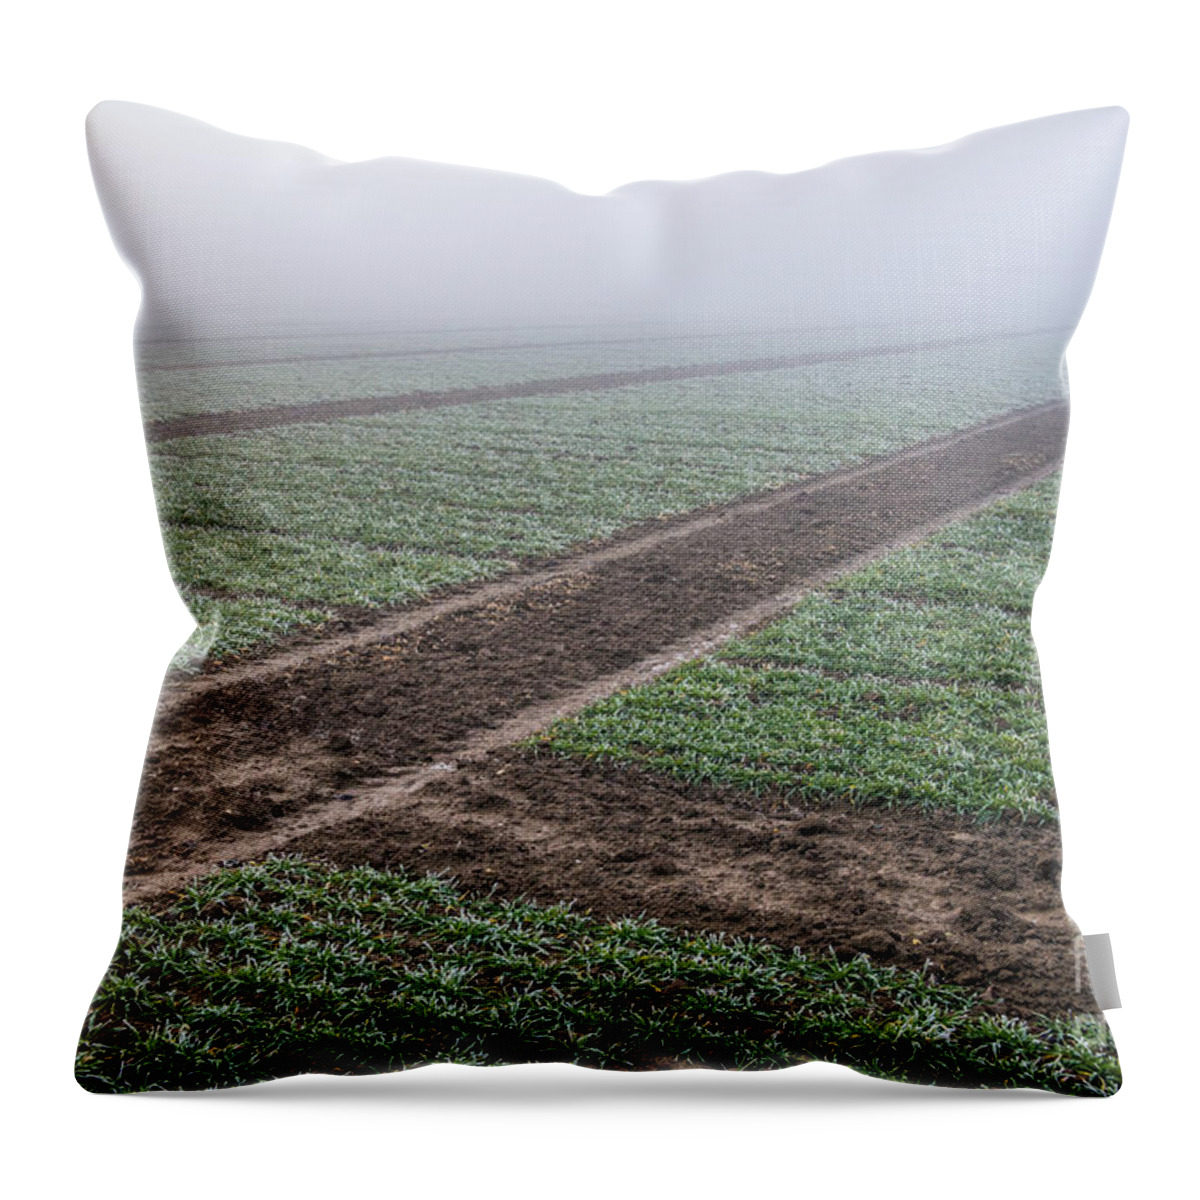 Austria Throw Pillow featuring the photograph Geometry In Agriculture by Hannes Cmarits